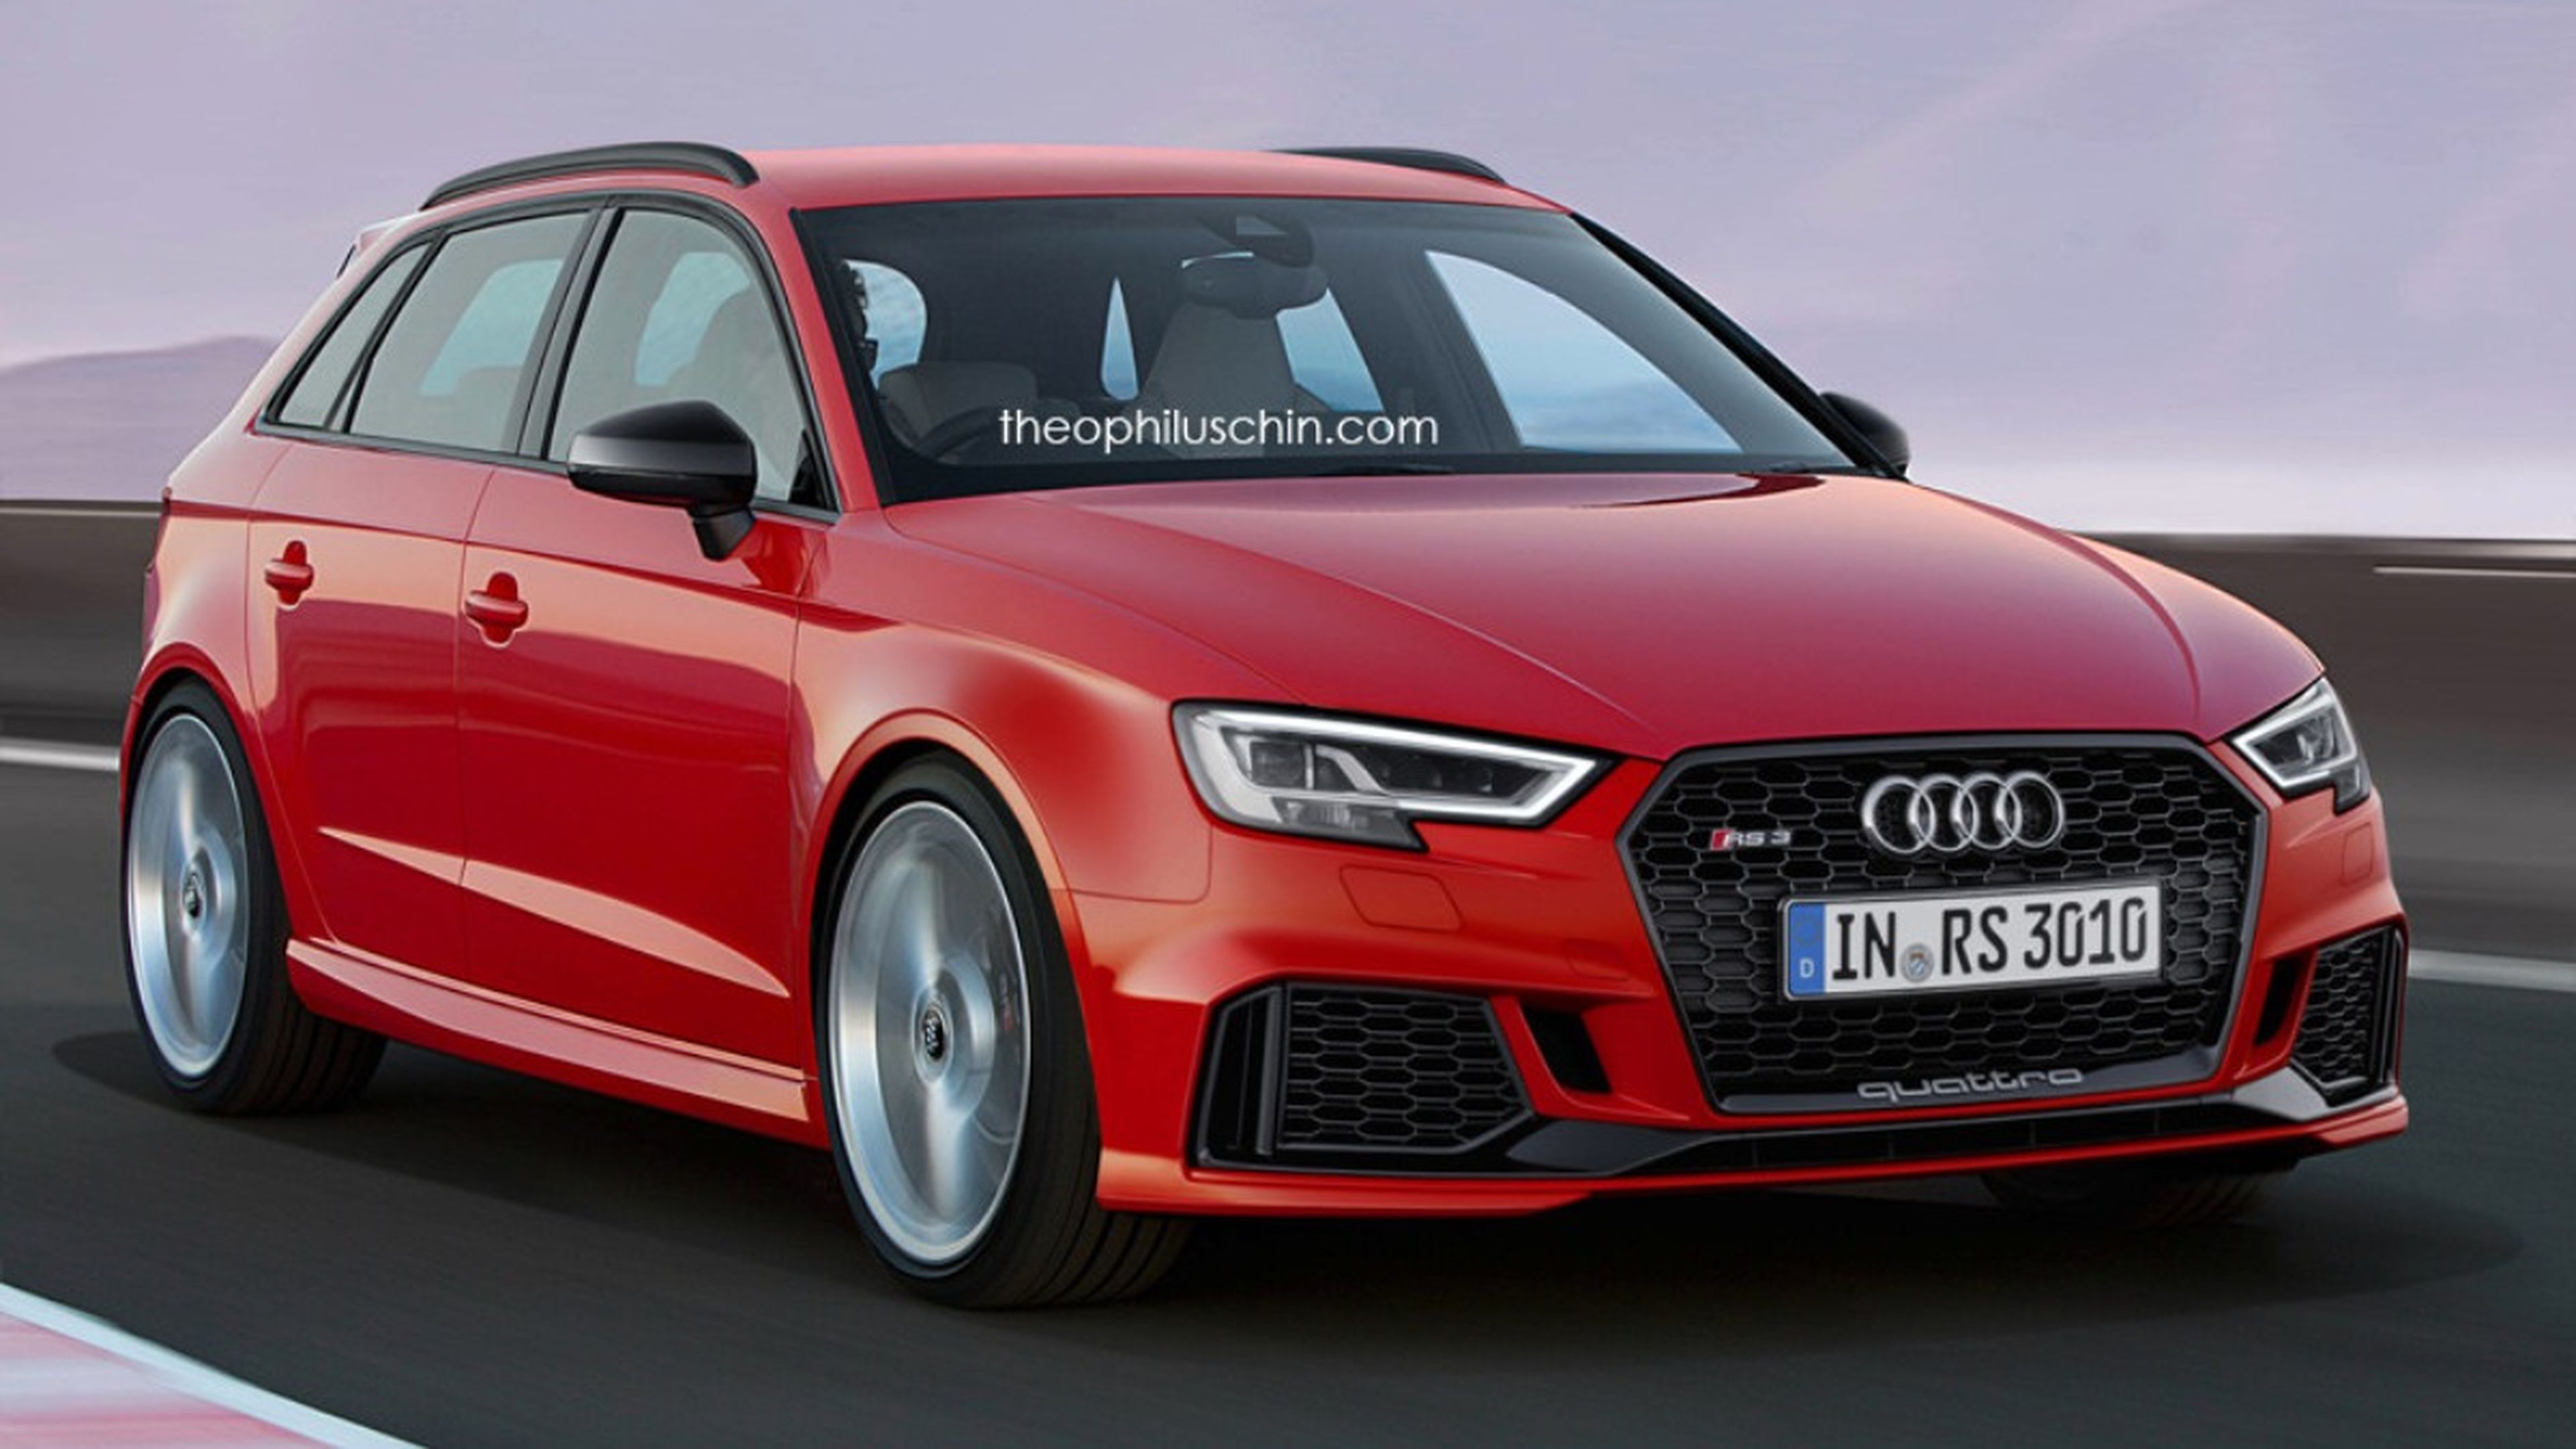 Audi RS 3 Sportback Theophilus Chin